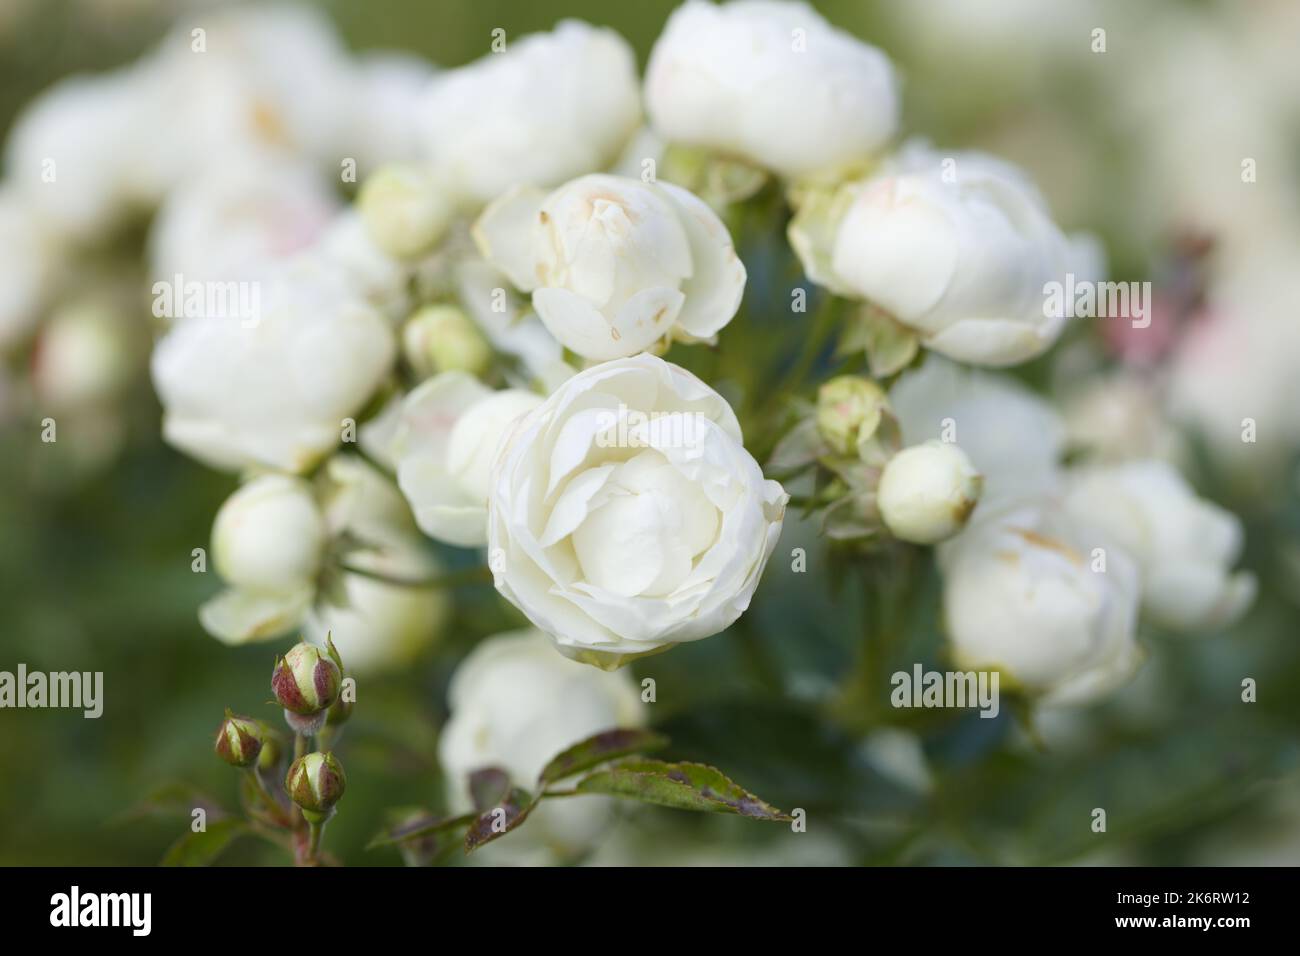 White rose flowers in a garden Stock Photo